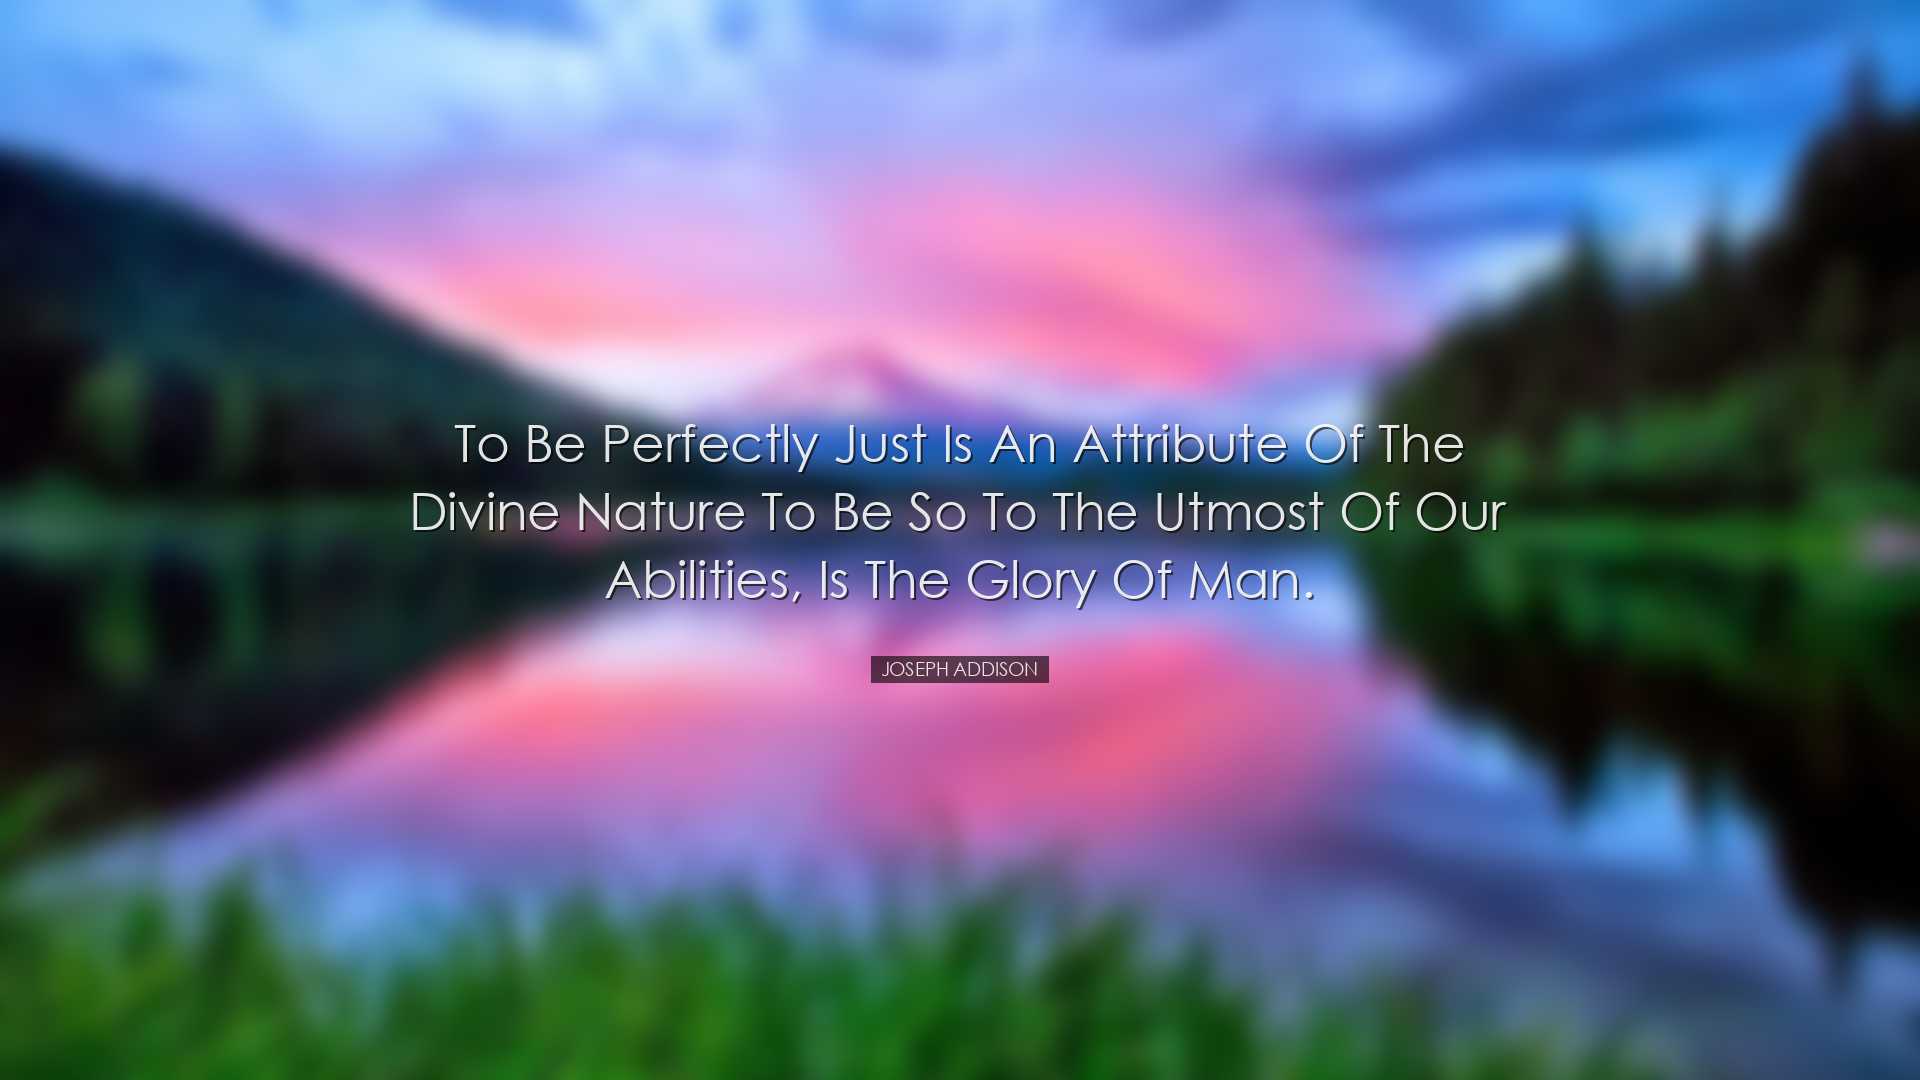 To be perfectly just is an attribute of the divine nature to be so